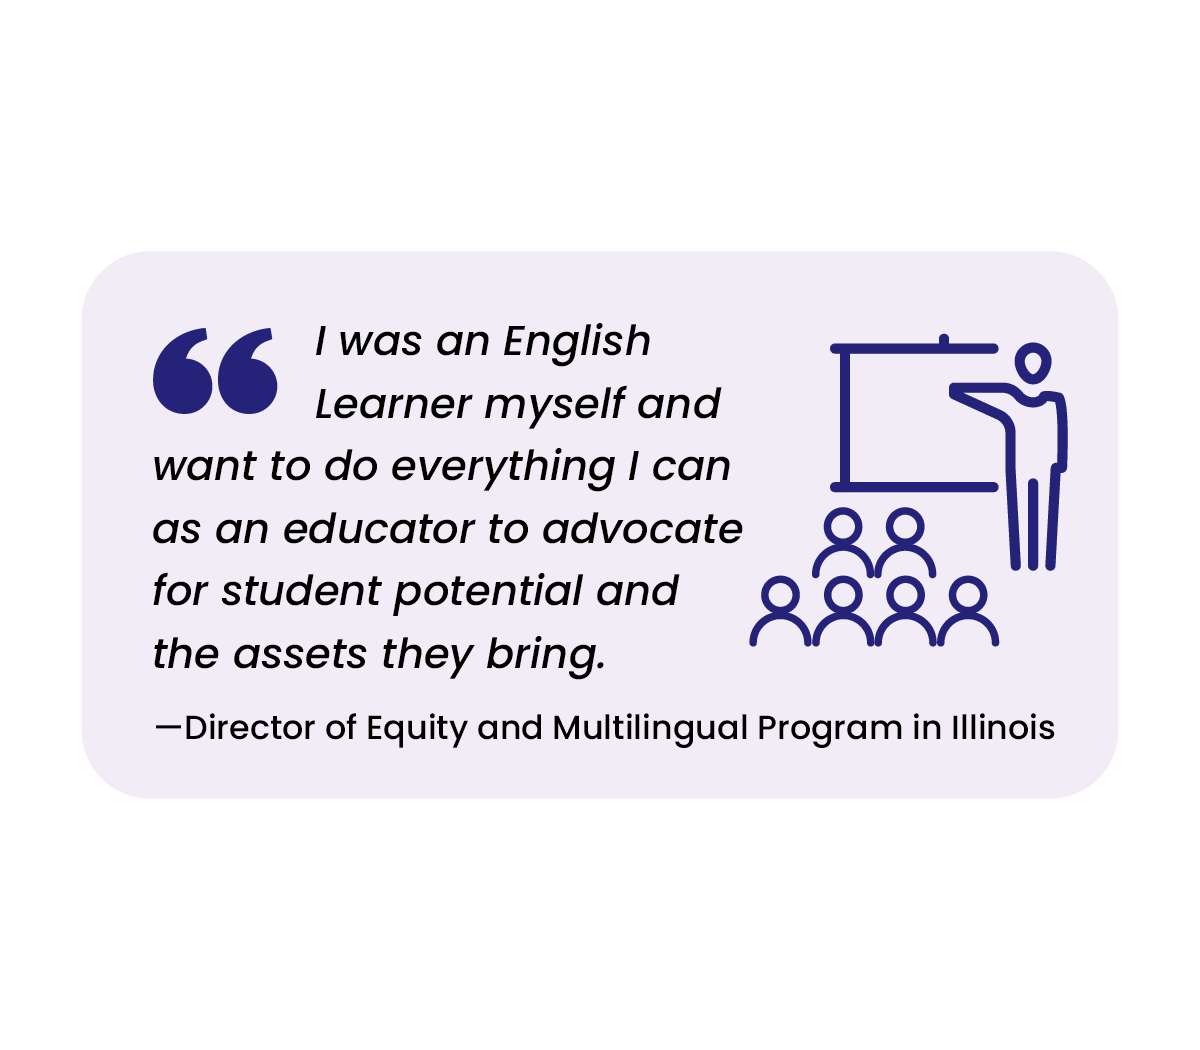 "I was an English Learner myself and want to do everything I can as an educator to advocate for student potential and the assets they bring." - Director of Equity and Multilingual Program in Illinois